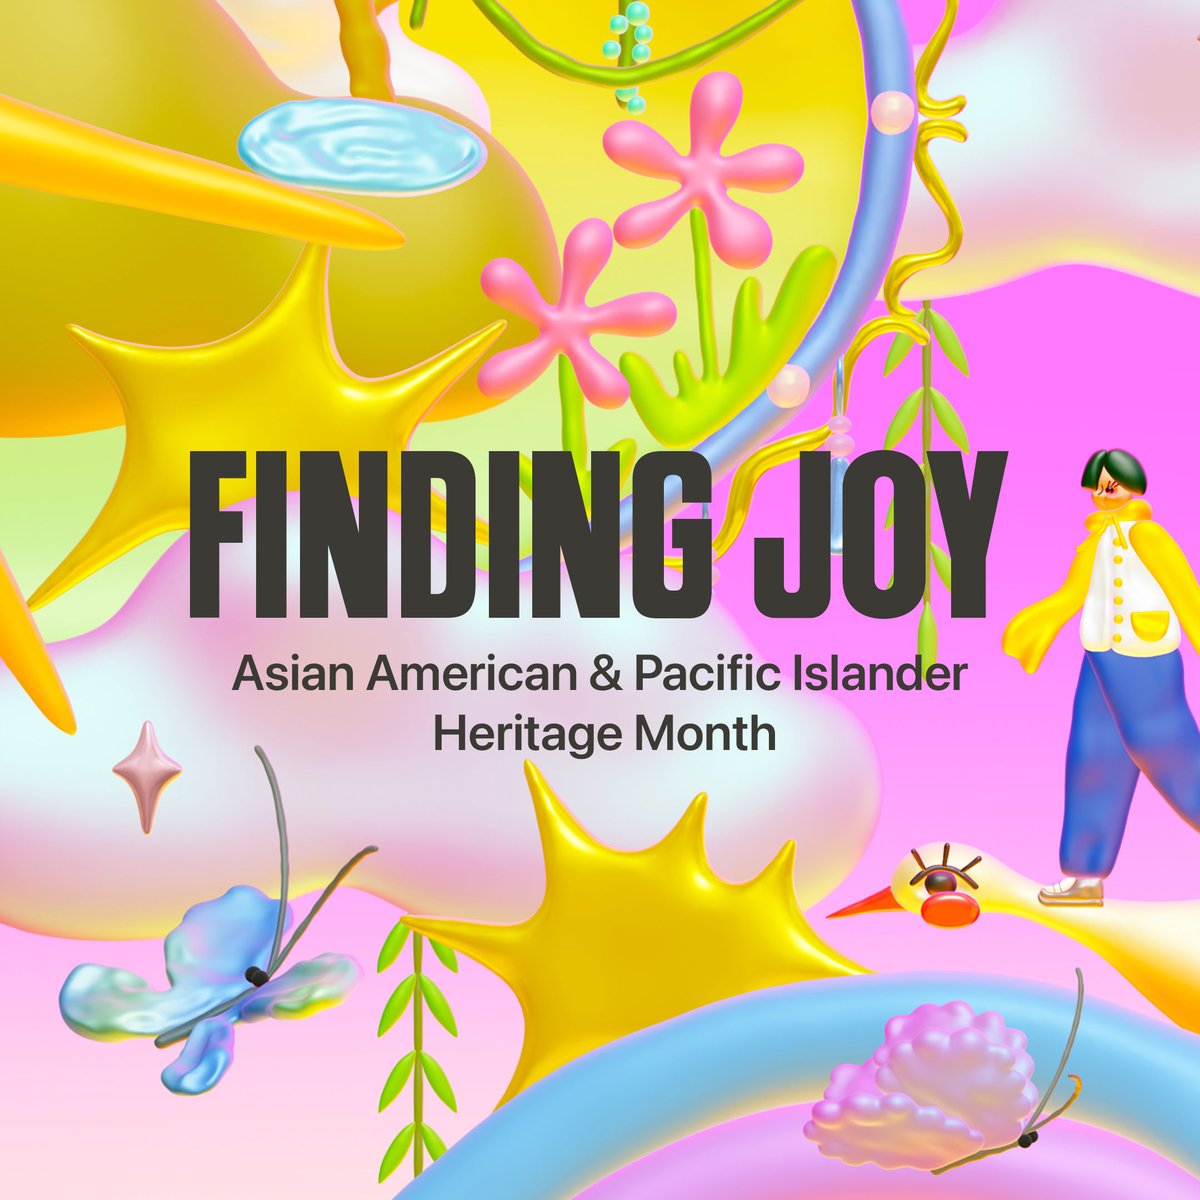 AAPI Heritage Month is a time to celebrate the diverse multitudes that exist and flourish in the AAPI community. This collection explores the past to help pave the way for the future and celebrates all that the community has contributed. apple.co/FindingJoy